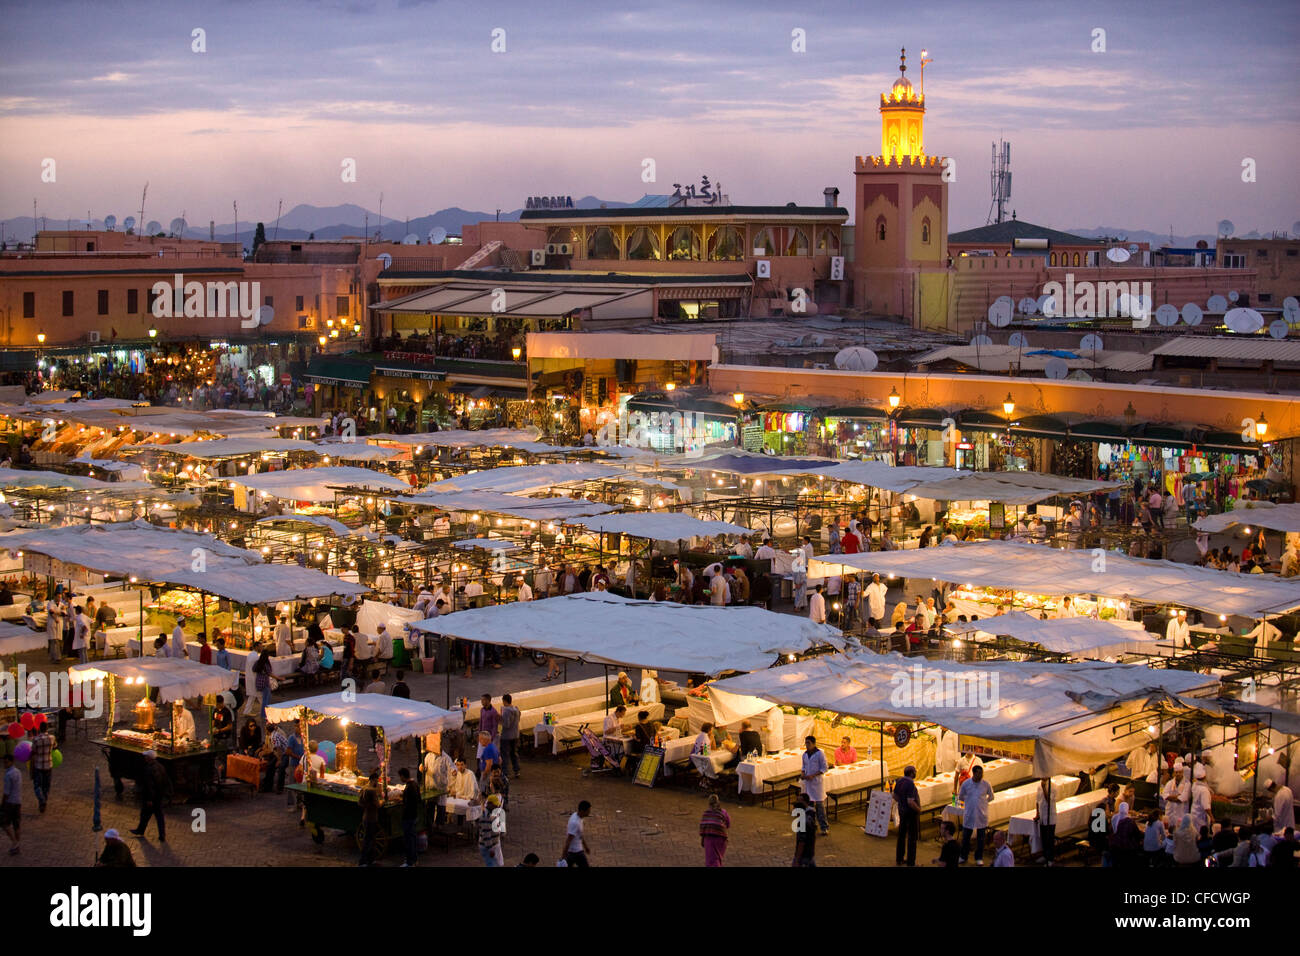 View over Djemaa el Fna at dusk with foodstalls that are set-up daily to serve tourists and locals, Marrakech, Morocco Stock Photo